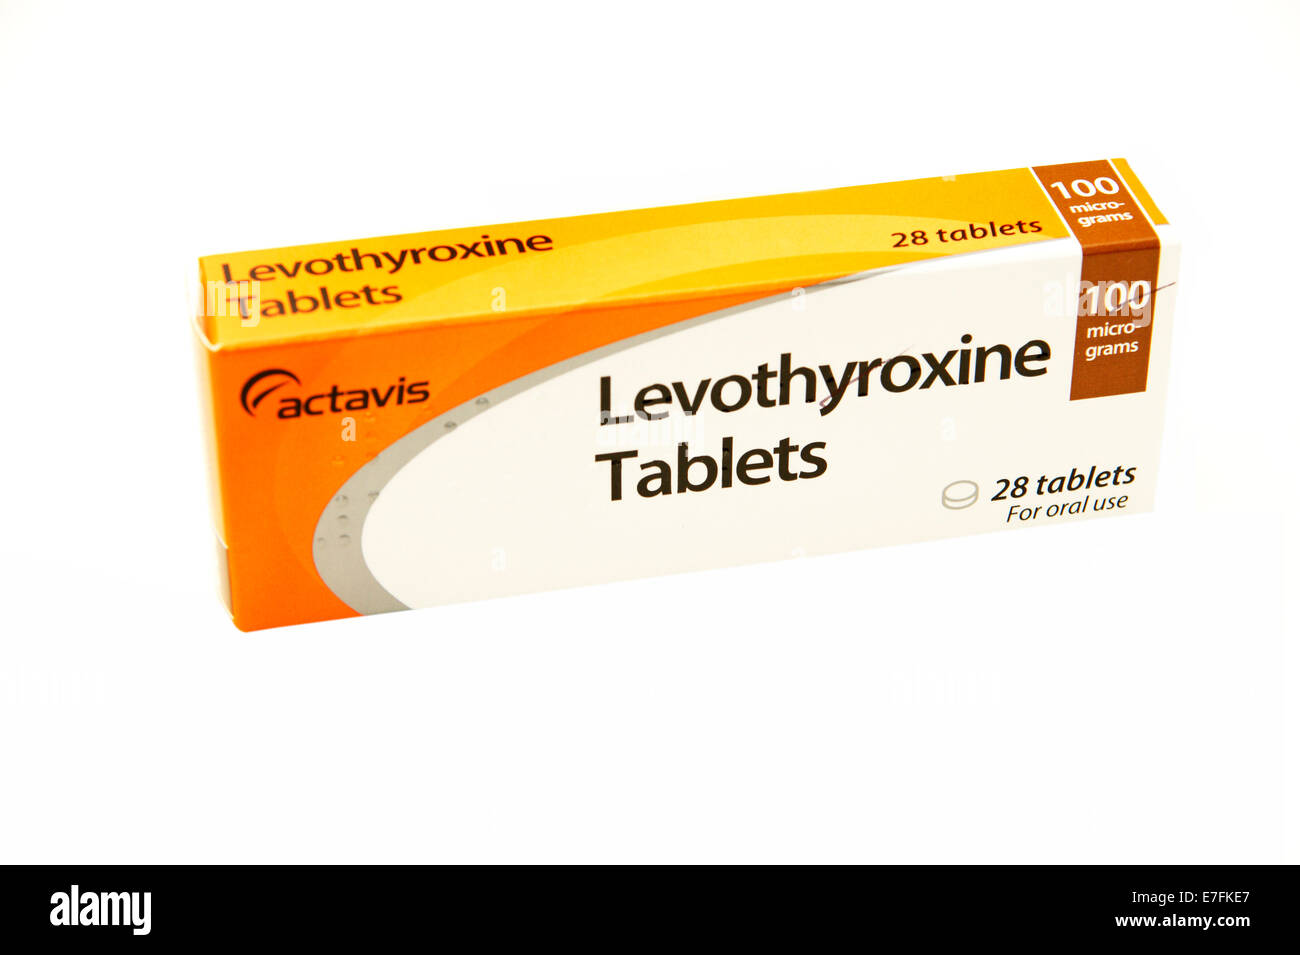 Levothyroxine tablets a replacement for a hormone normally produced by your thyroid gland to regulate the body's energy and meta Stock Photo